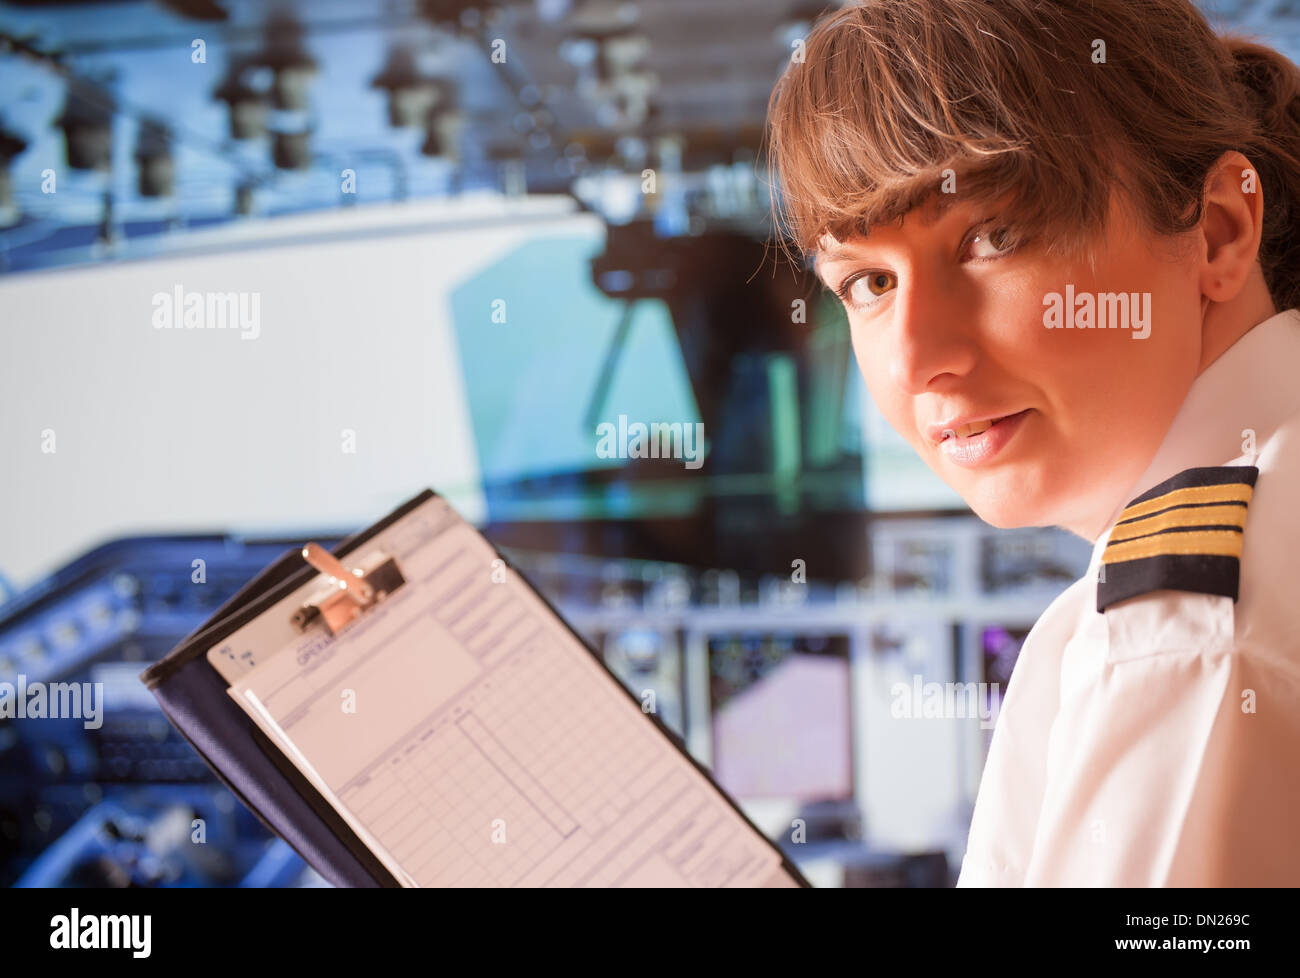 Beautiful woman pilot wearing uniform with epauletes and headset with notepad inside airliner Stock Photo